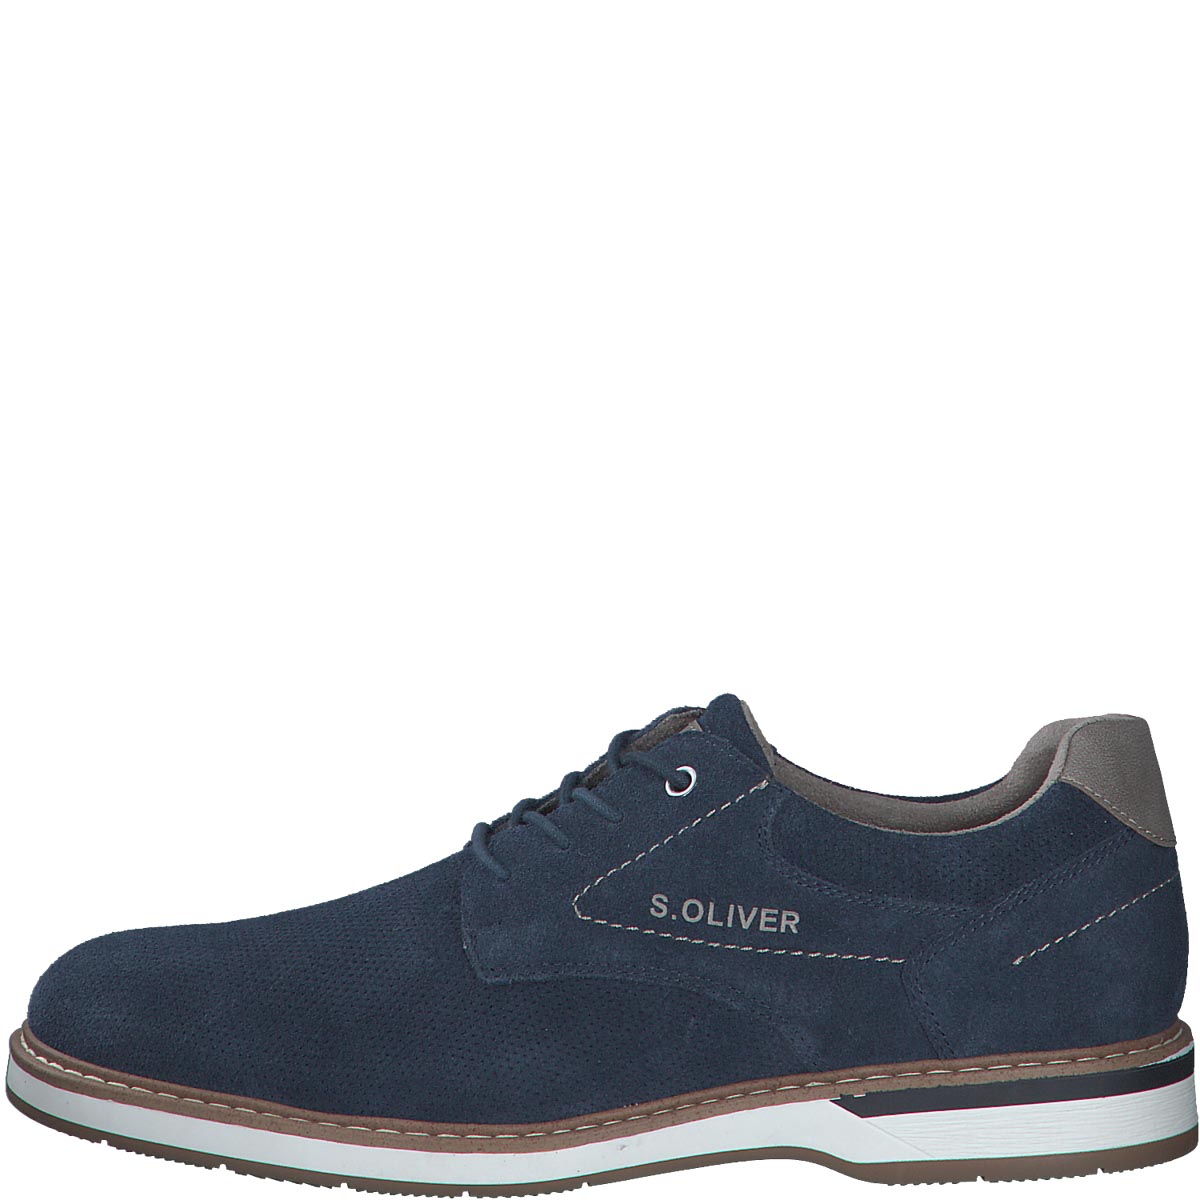 S.Oliver Men's Navy Nubuck Lace-Up Shoes with Soft Foam Insole